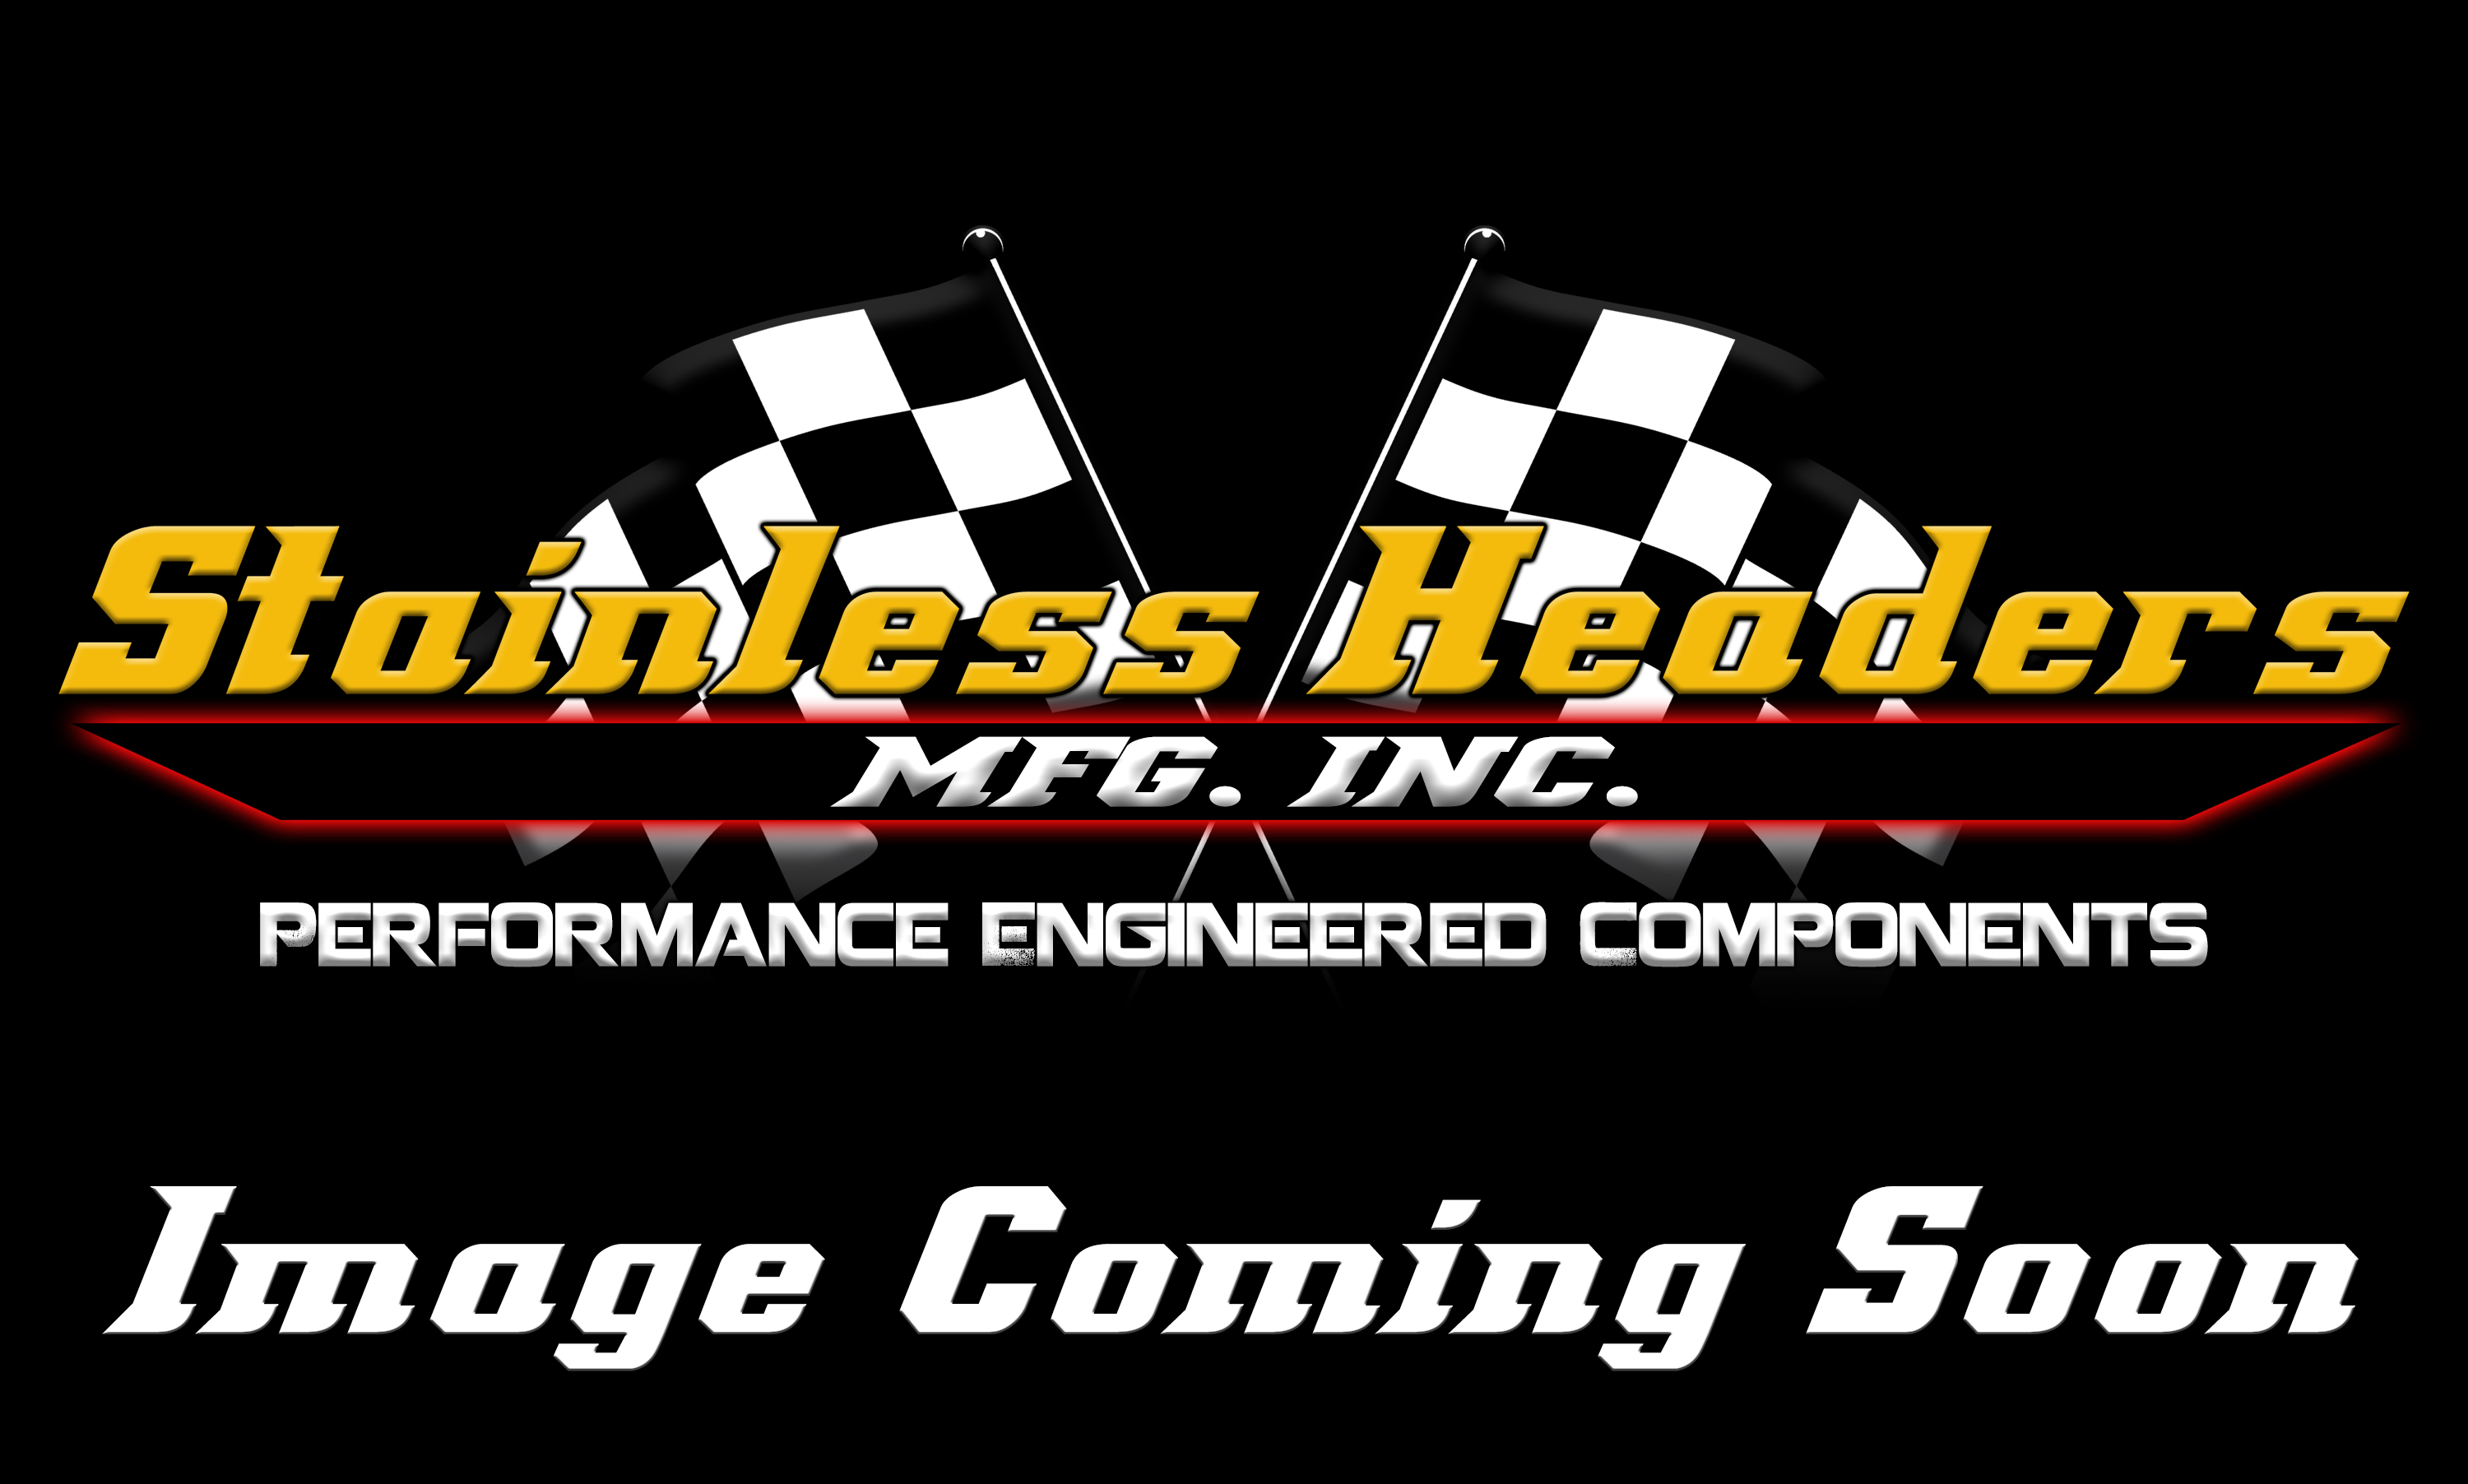 Merge Collectors - 321 Stainless Steel Merge Collectors - Stainless Headers - 1 1/2" Primary 5 into 1 Performance Merge Collector-16ga 321ss